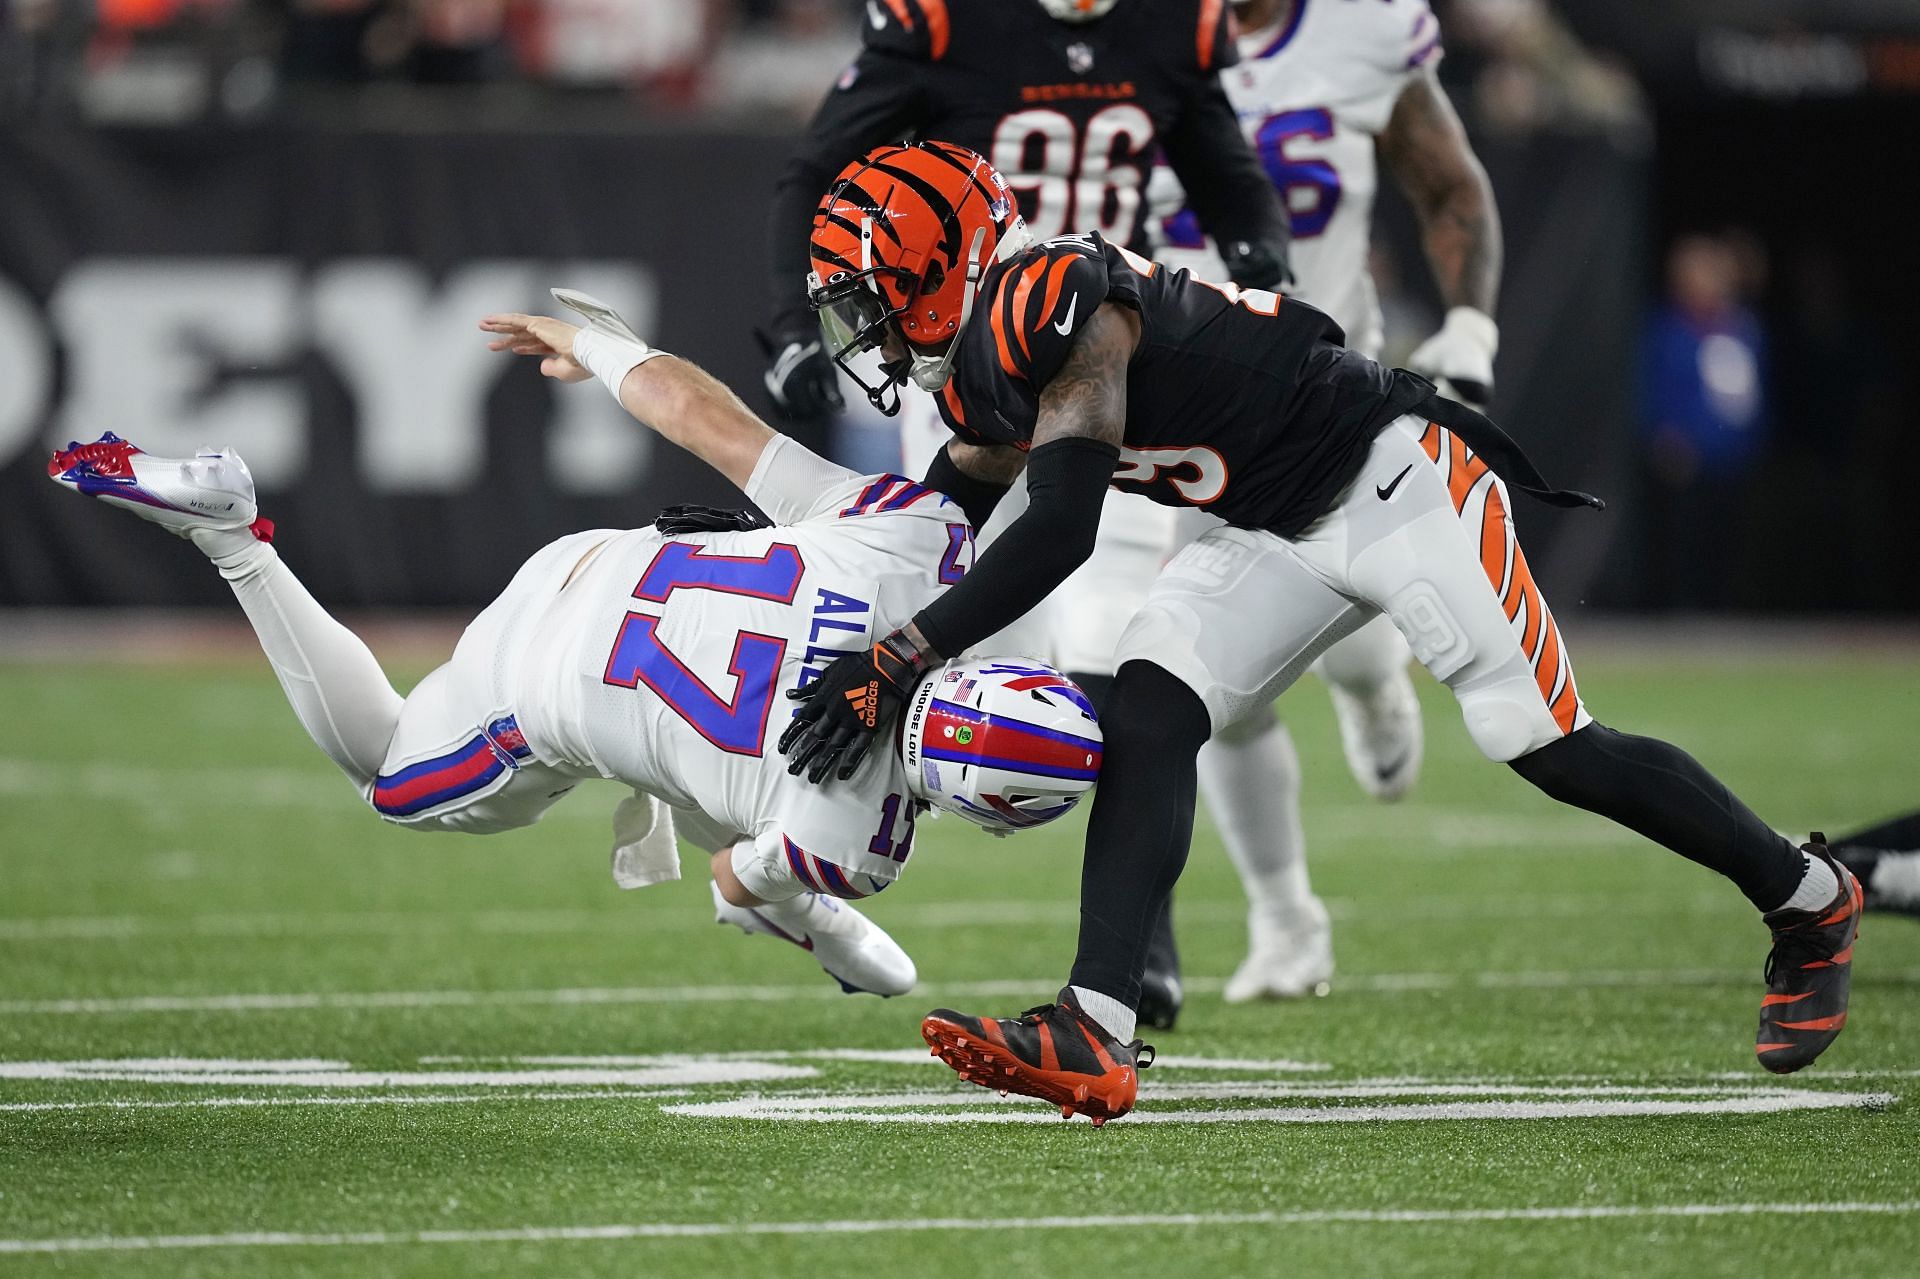 NFL playoff picture: What are implications if Bills-Bengals is declared a  tie or vacated? - DraftKings Network